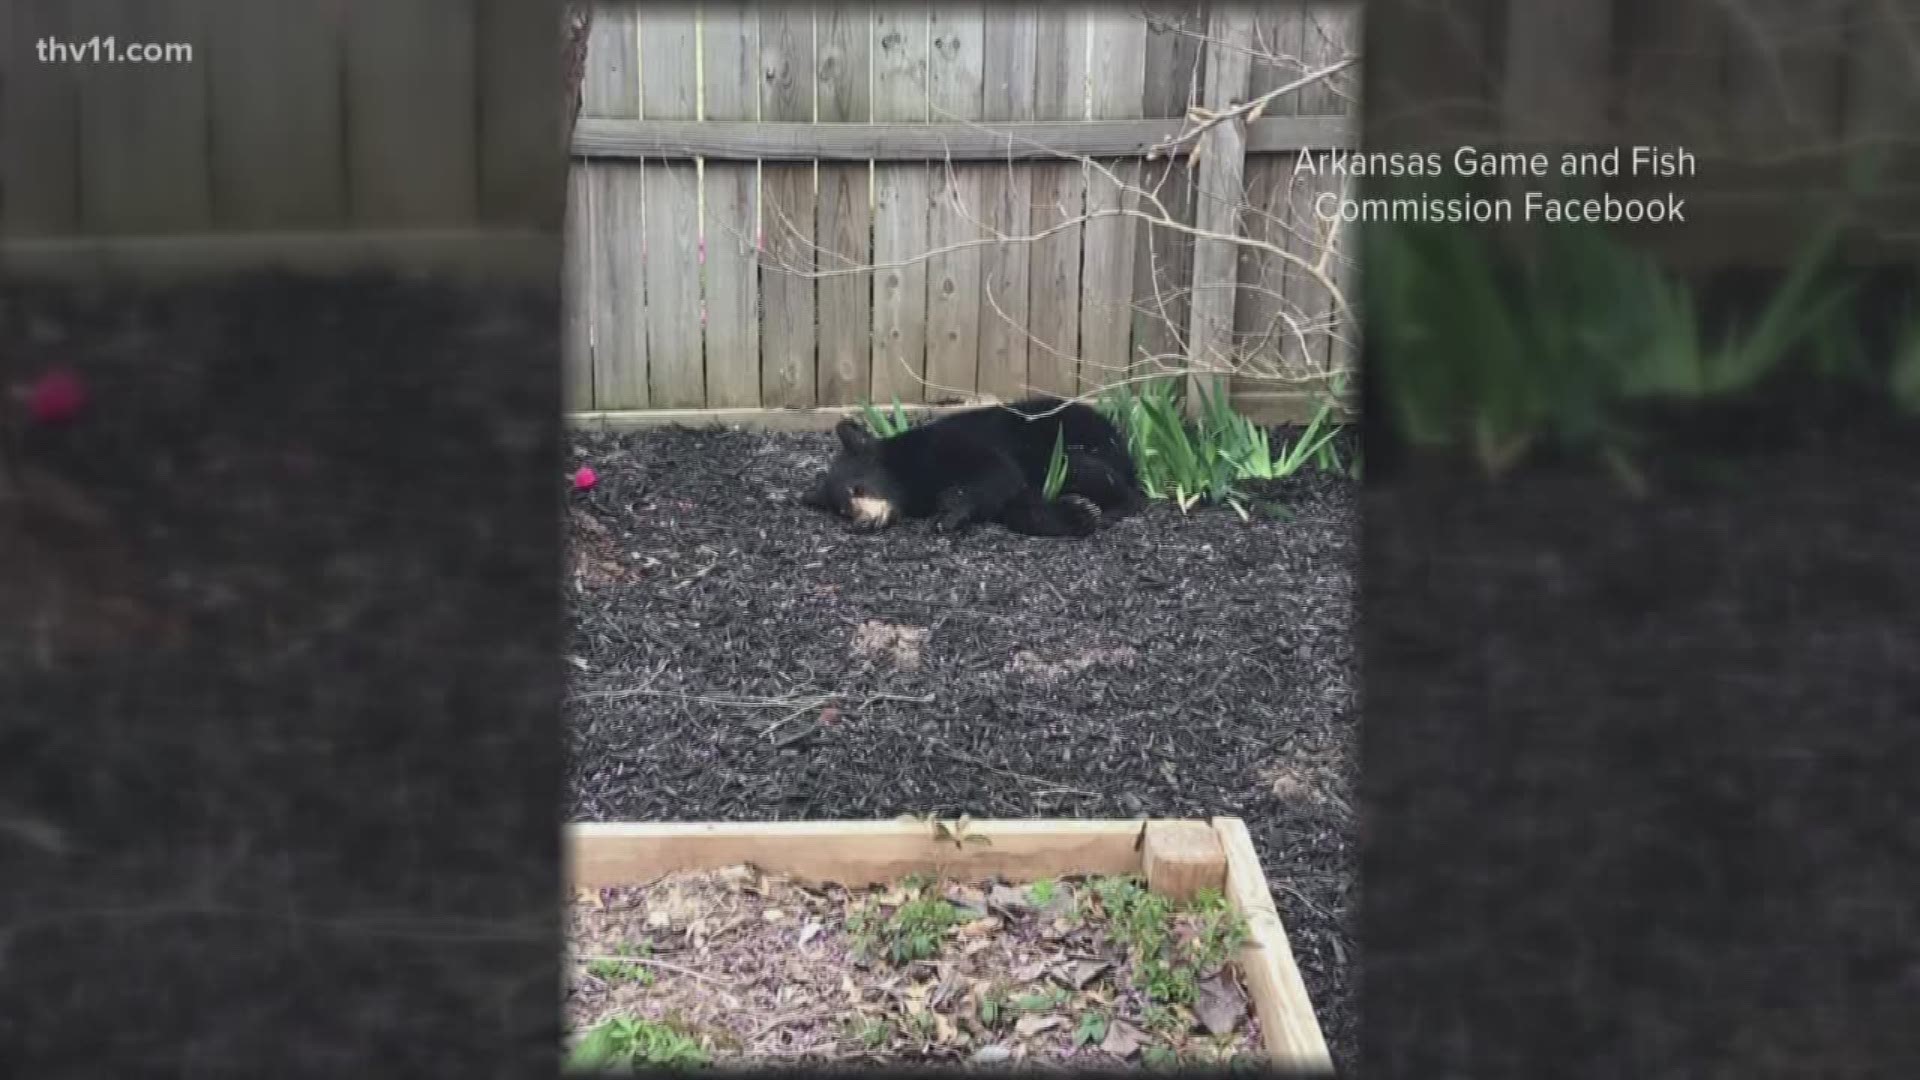 Black bears are coming out of hiding in Arkansas.